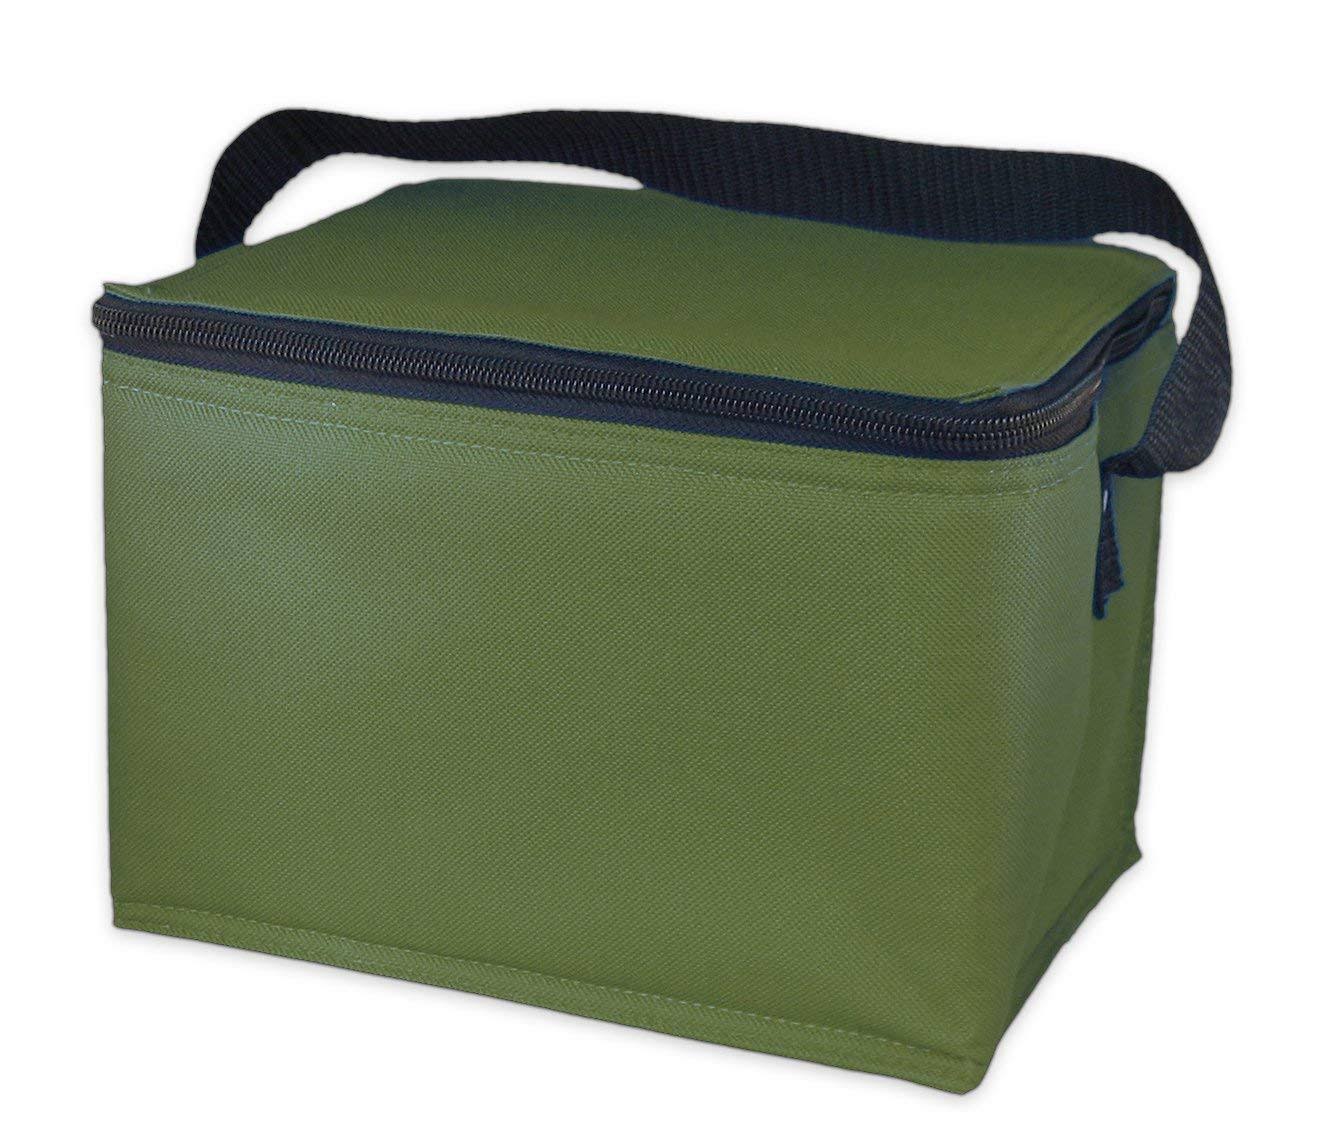 EasyLunchboxes Insulated Lunch Box Cooler Bag | Storage & Organisation